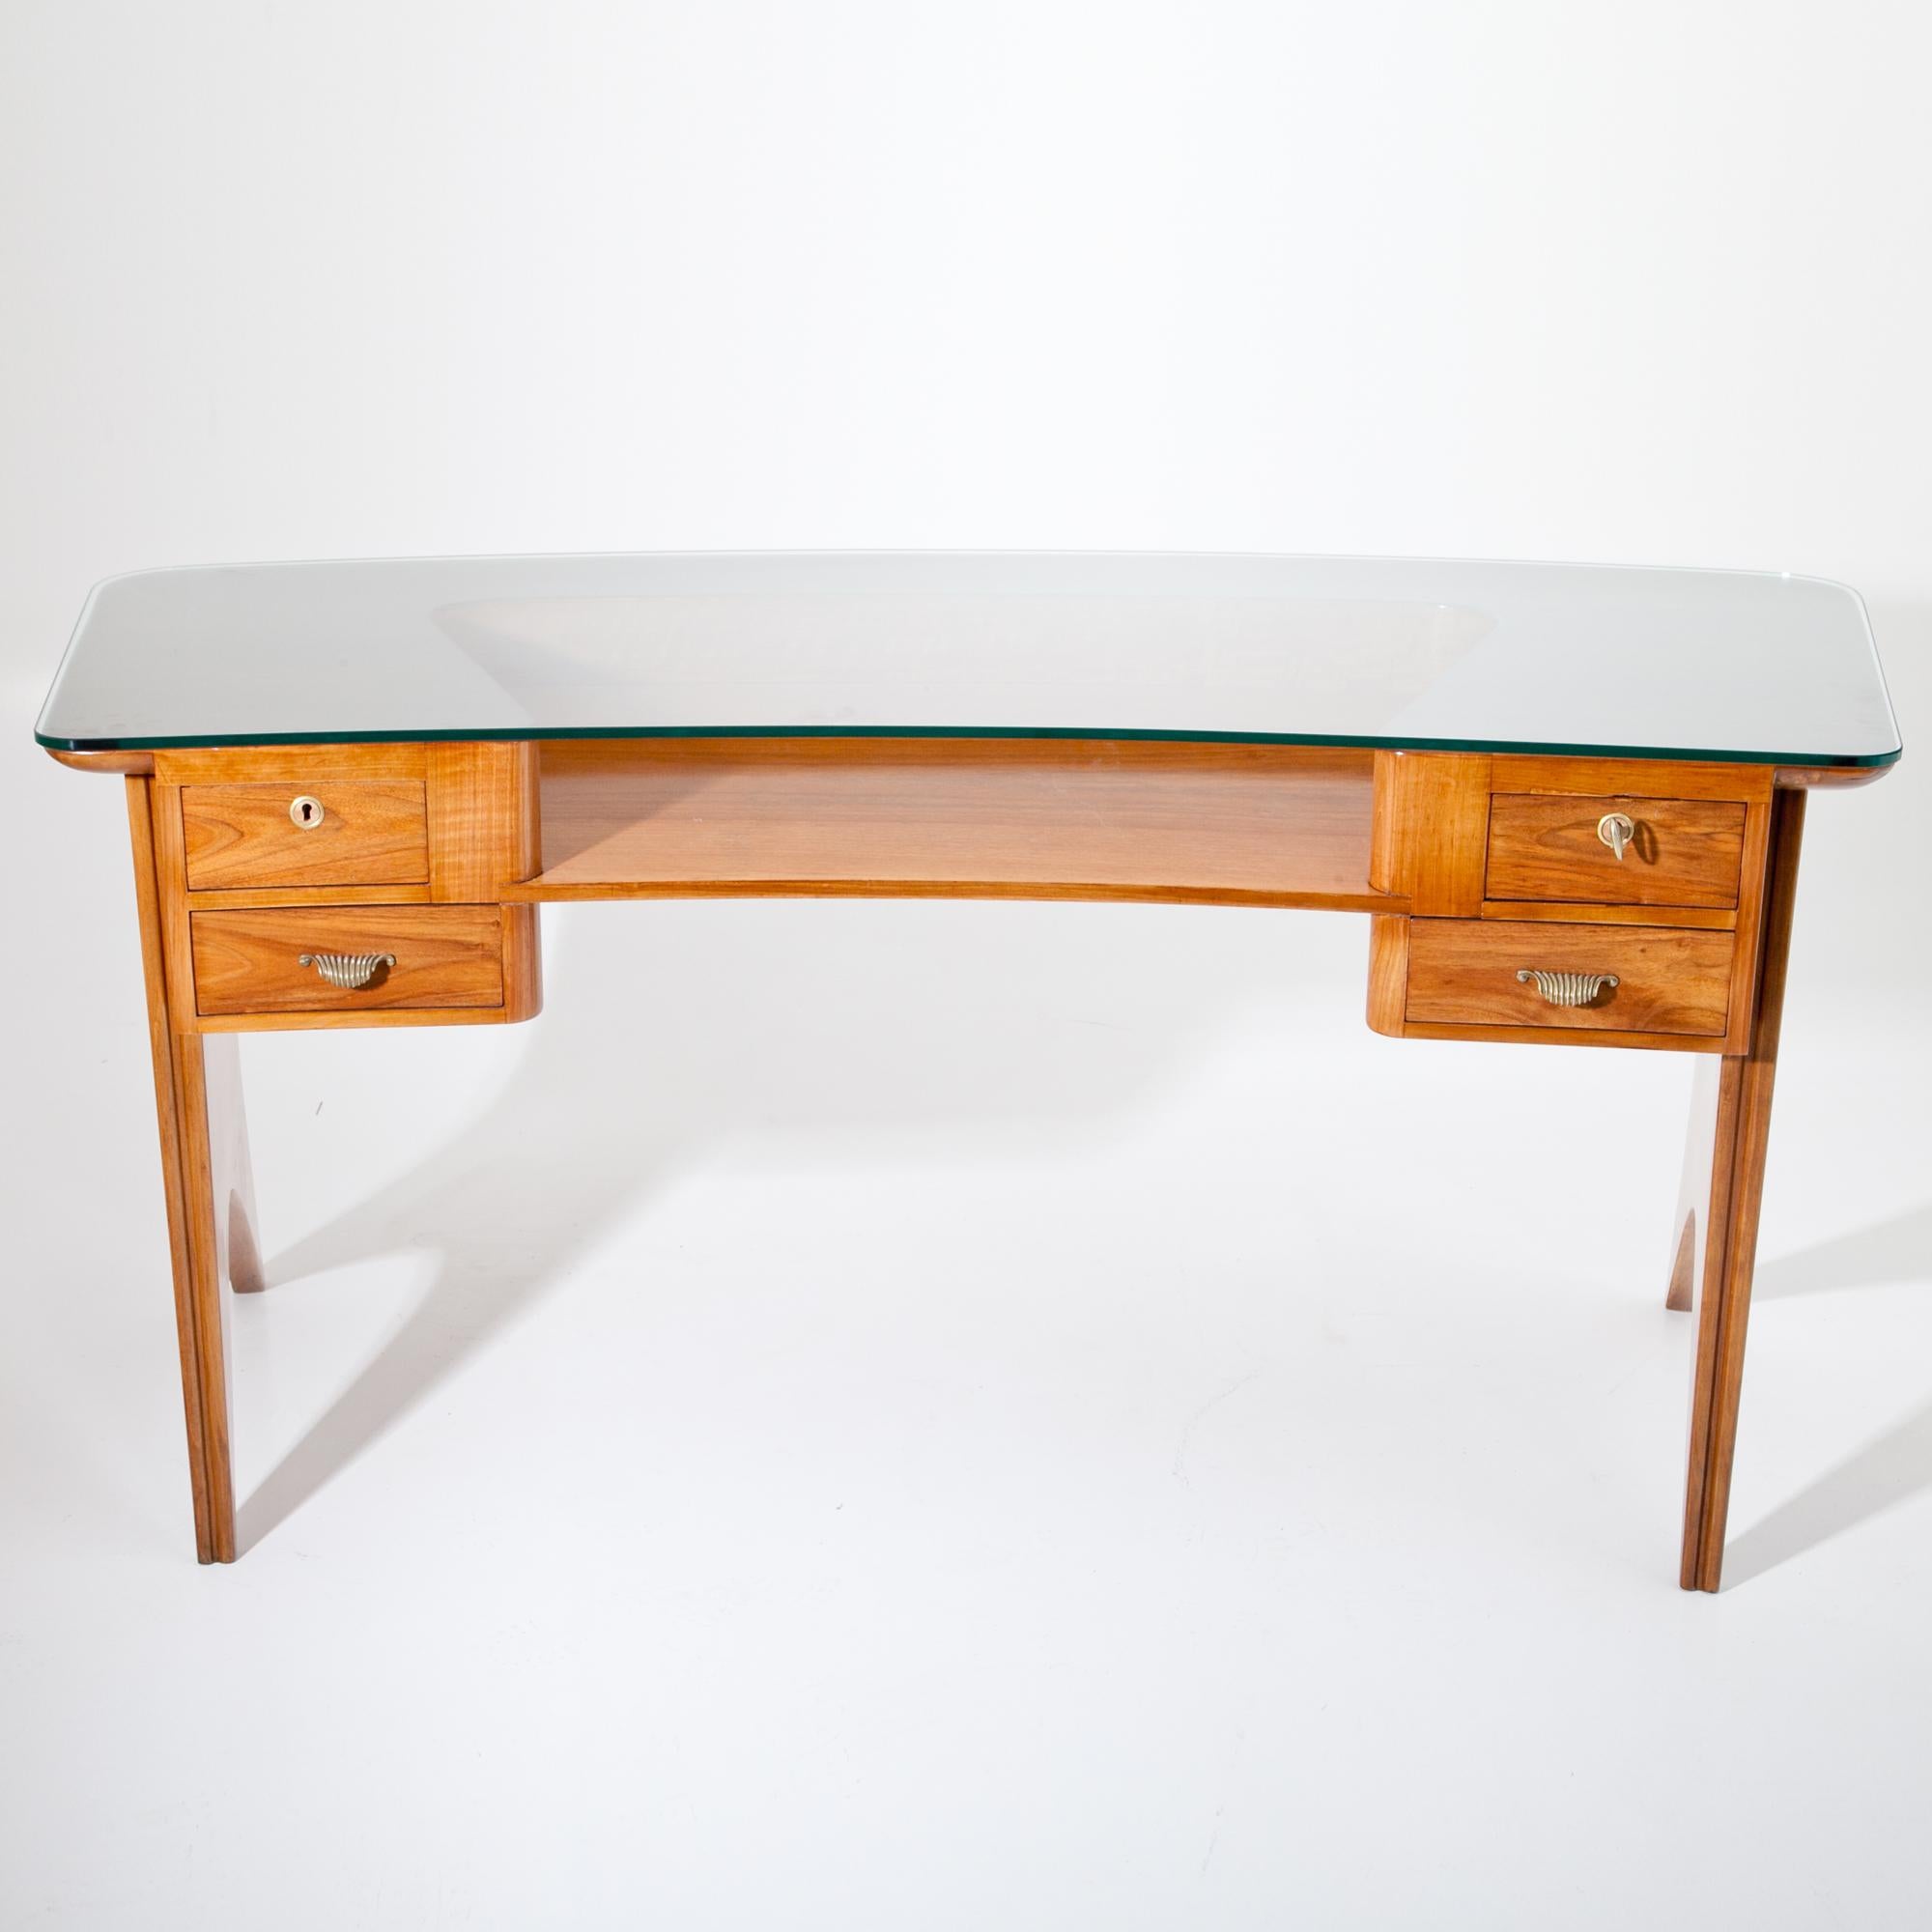 Slightly curved Italian desk, standing on tapered side panels. The desk has four drawers and one big shelf underneath the glass tabletop. The desk was professionally refurbished.